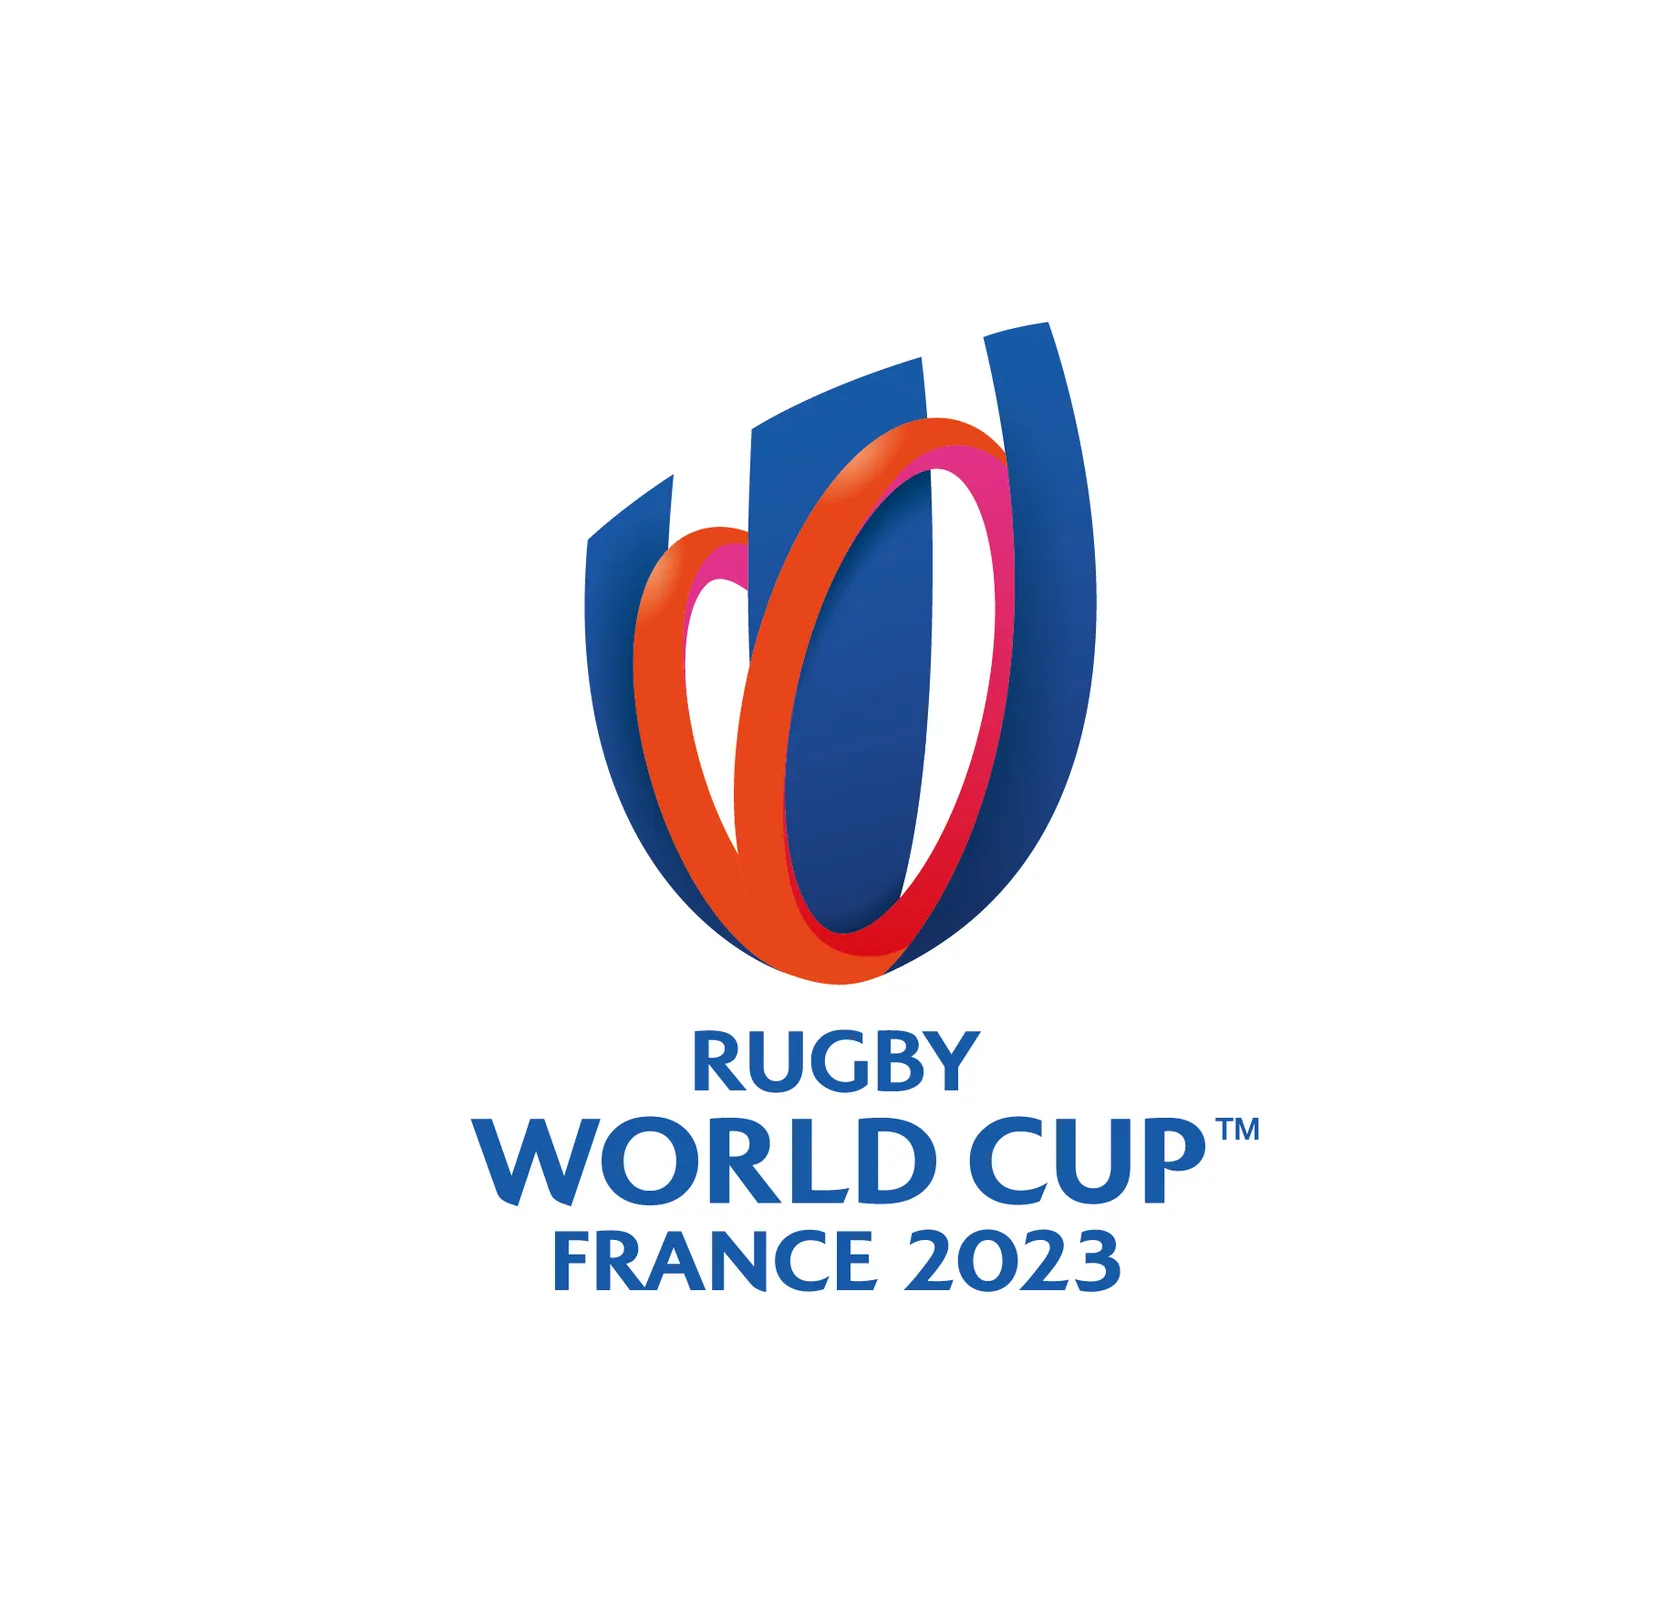 rugby World Cup 2023 logo